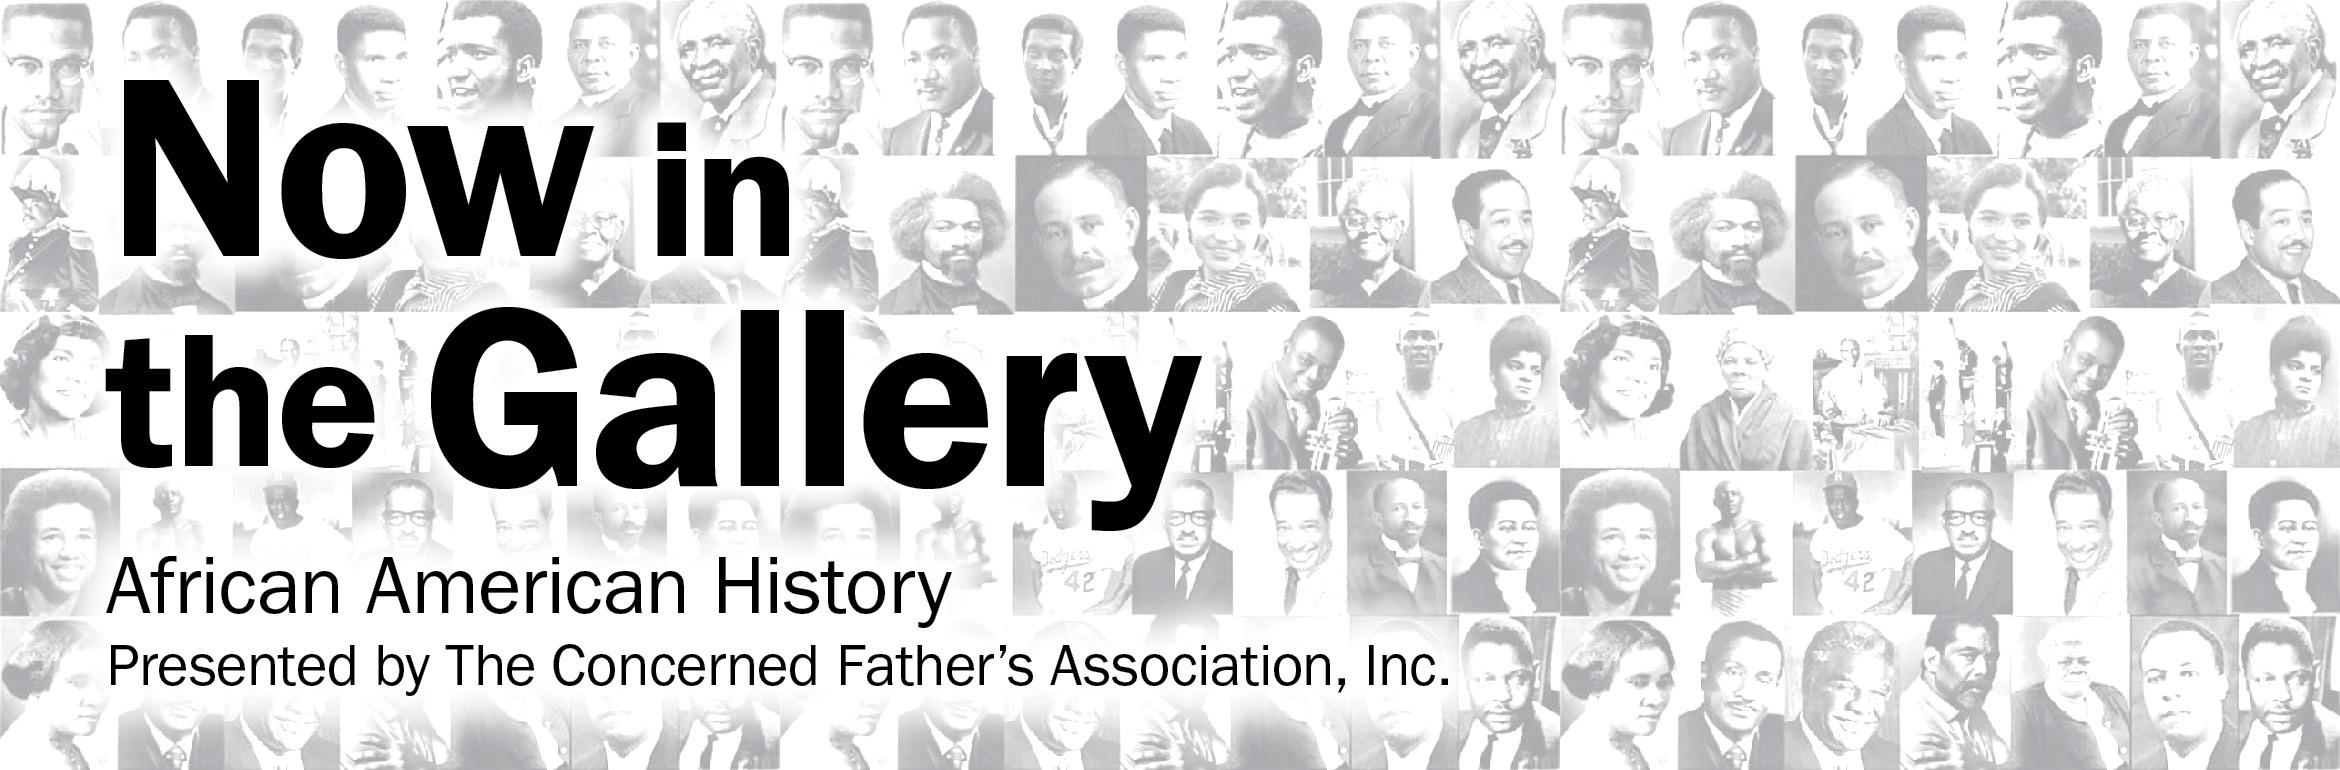 Now in the Gallery. African American History. Presented by The Concerned Father's Association, Inc.